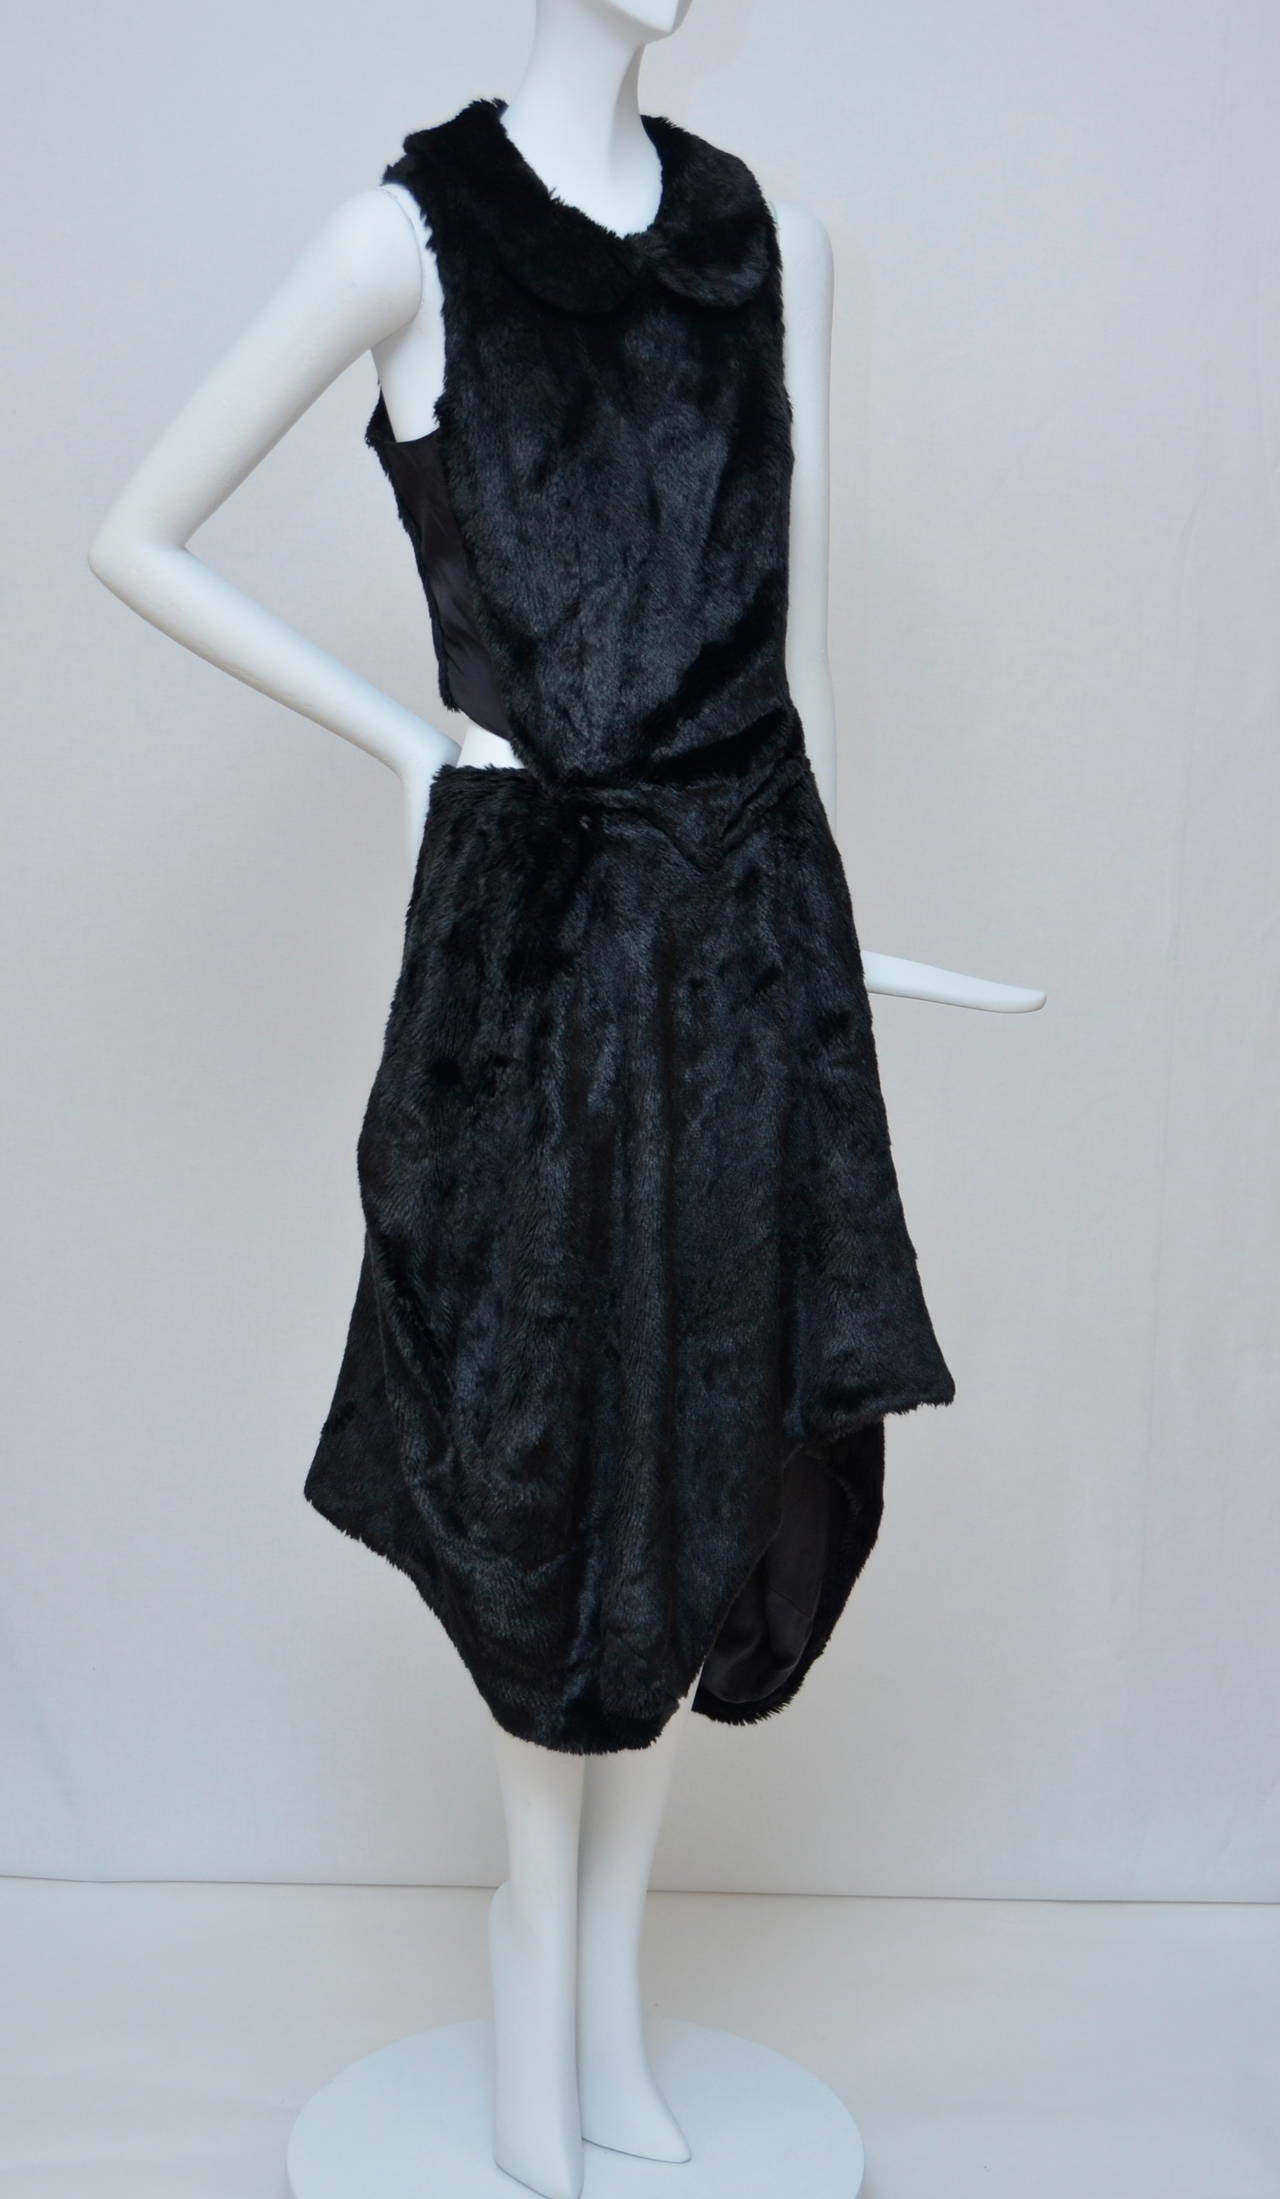 Amazing fashionable Comme Des Garcons NOIR Faux Fur dress.
2008 Collection.Unique design with amazing faux fabric .
This dress could be worn so many ways with a slip underneath or by itself.
Size S.
Made in japan.
Sleeveles,Peter Pan